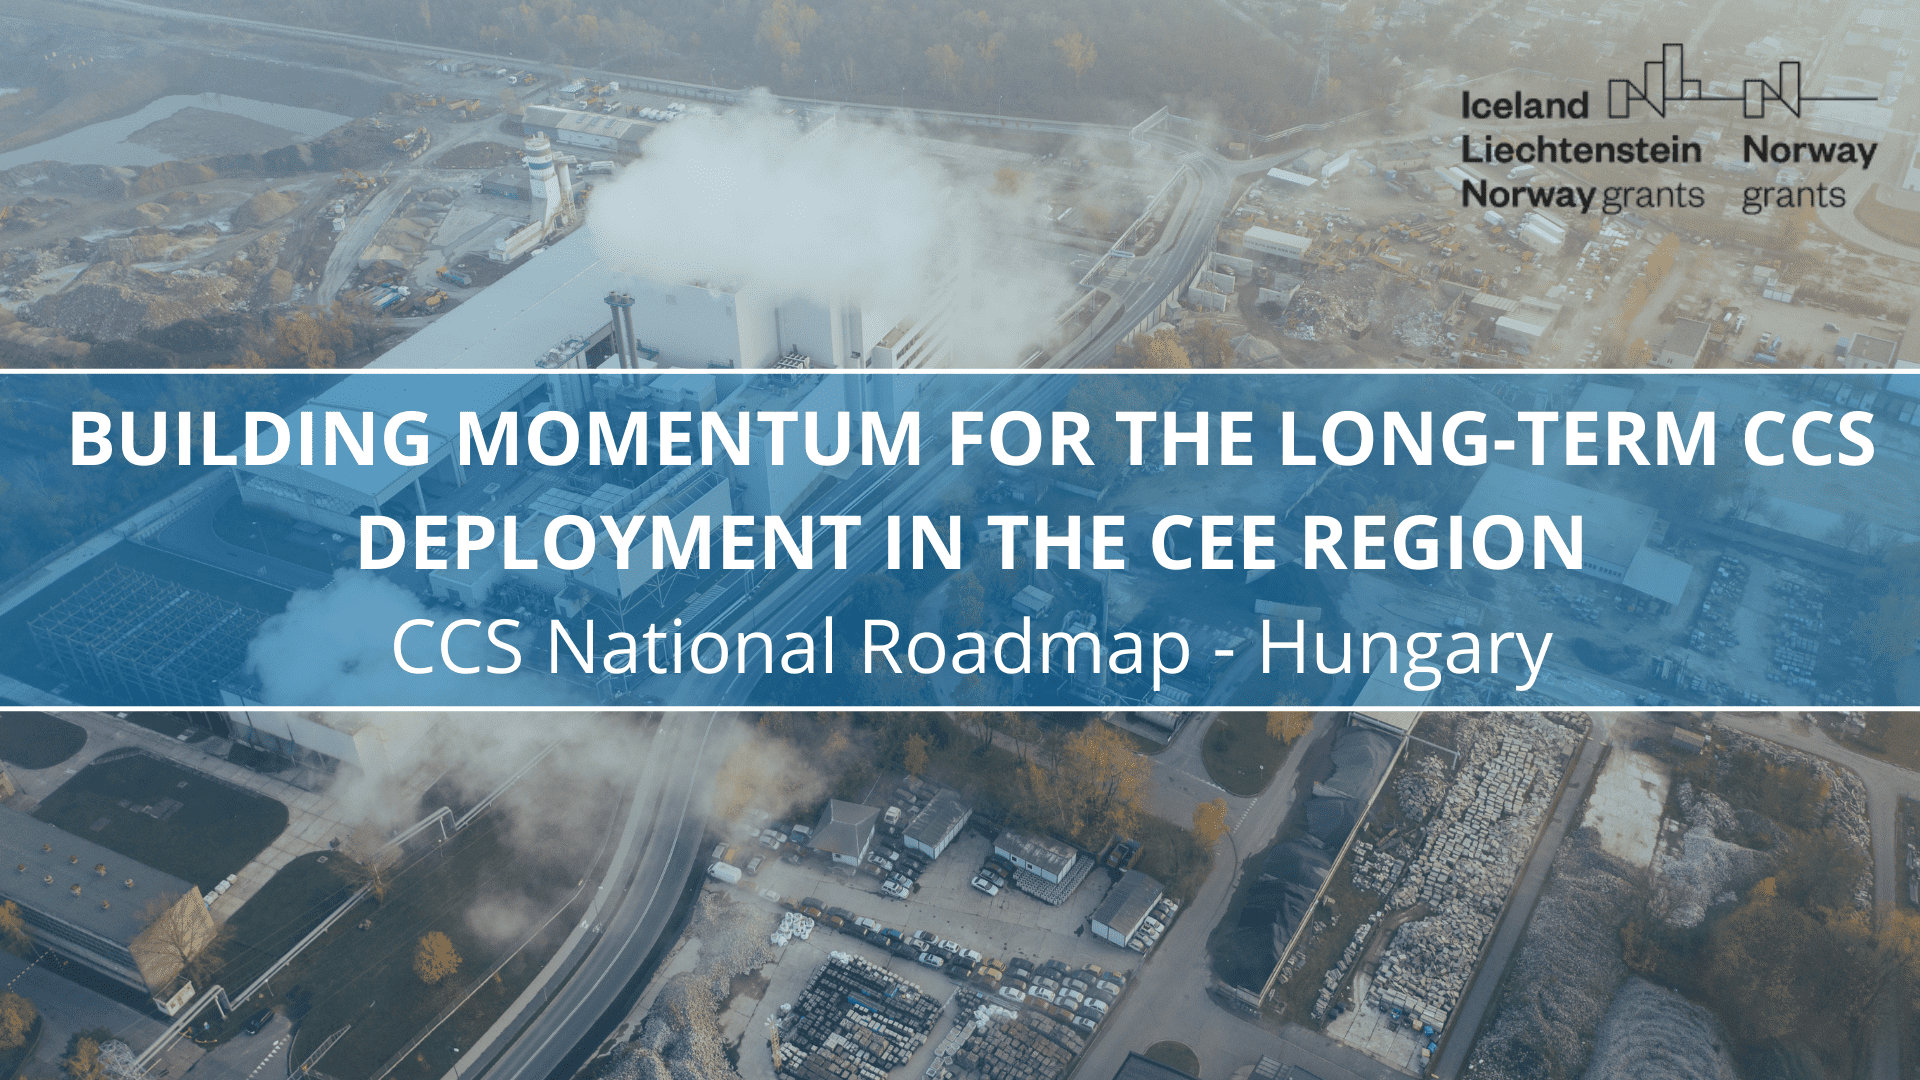 BUILDING MOMENTUM FOR THE LONG-TERM CCS DEPLOYMENT IN THE CEE REGION:  CCS National Roadmap – Hungary